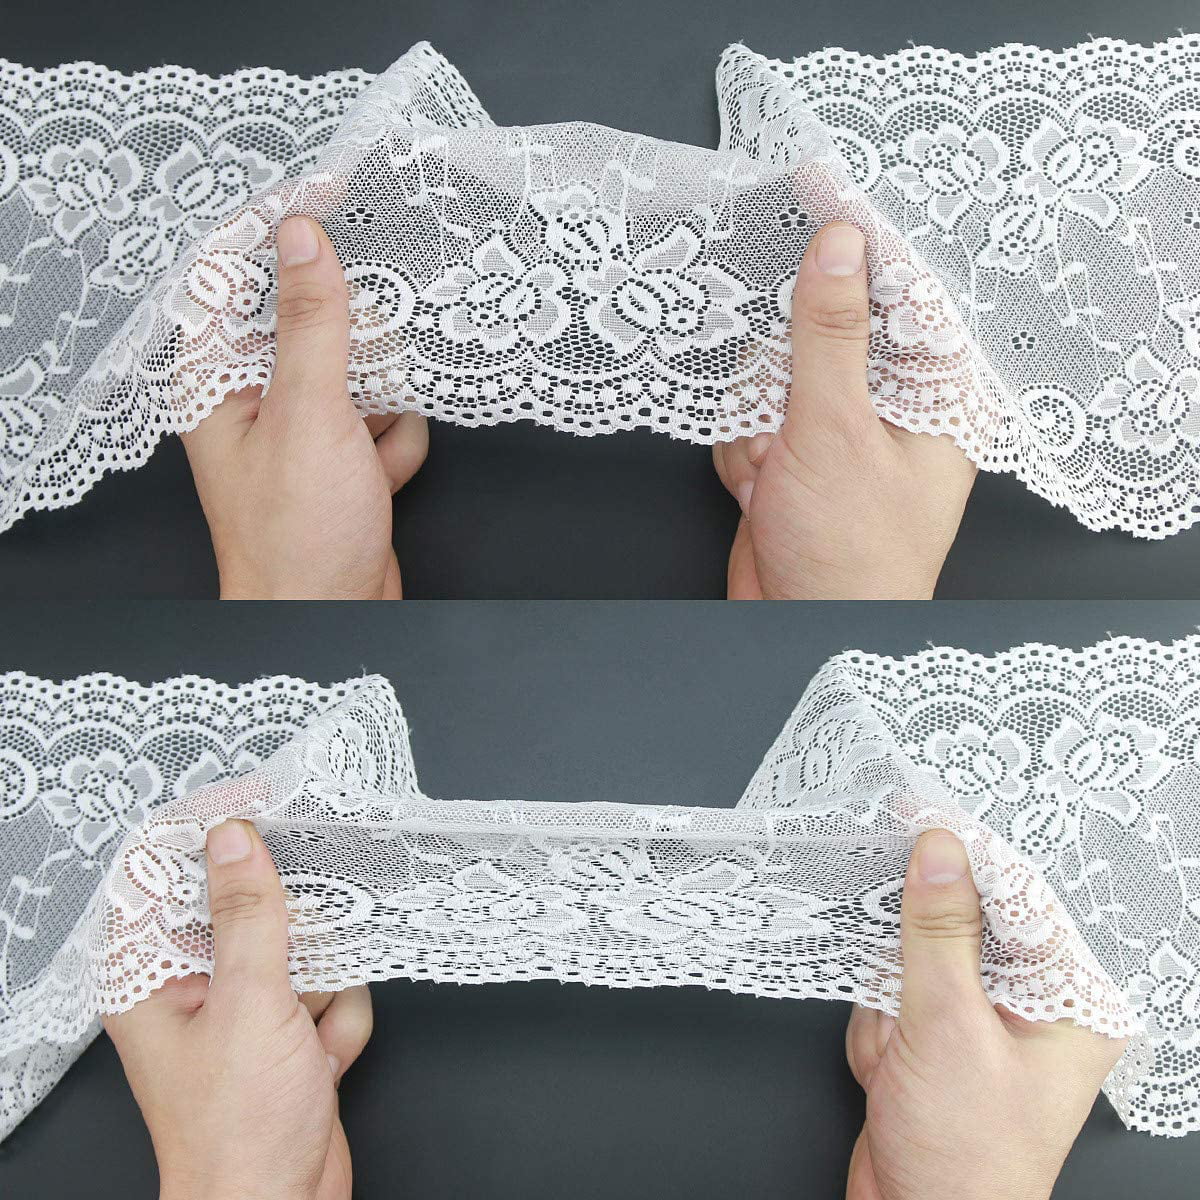 2.4 Inch White Lace Ribbon,Sewing Lace Trim, Elastic Stretchy White Lace  Fabric - 5 Yard,Perfect for Crafting,Sewing Making,Gift Wrapping and Bridal